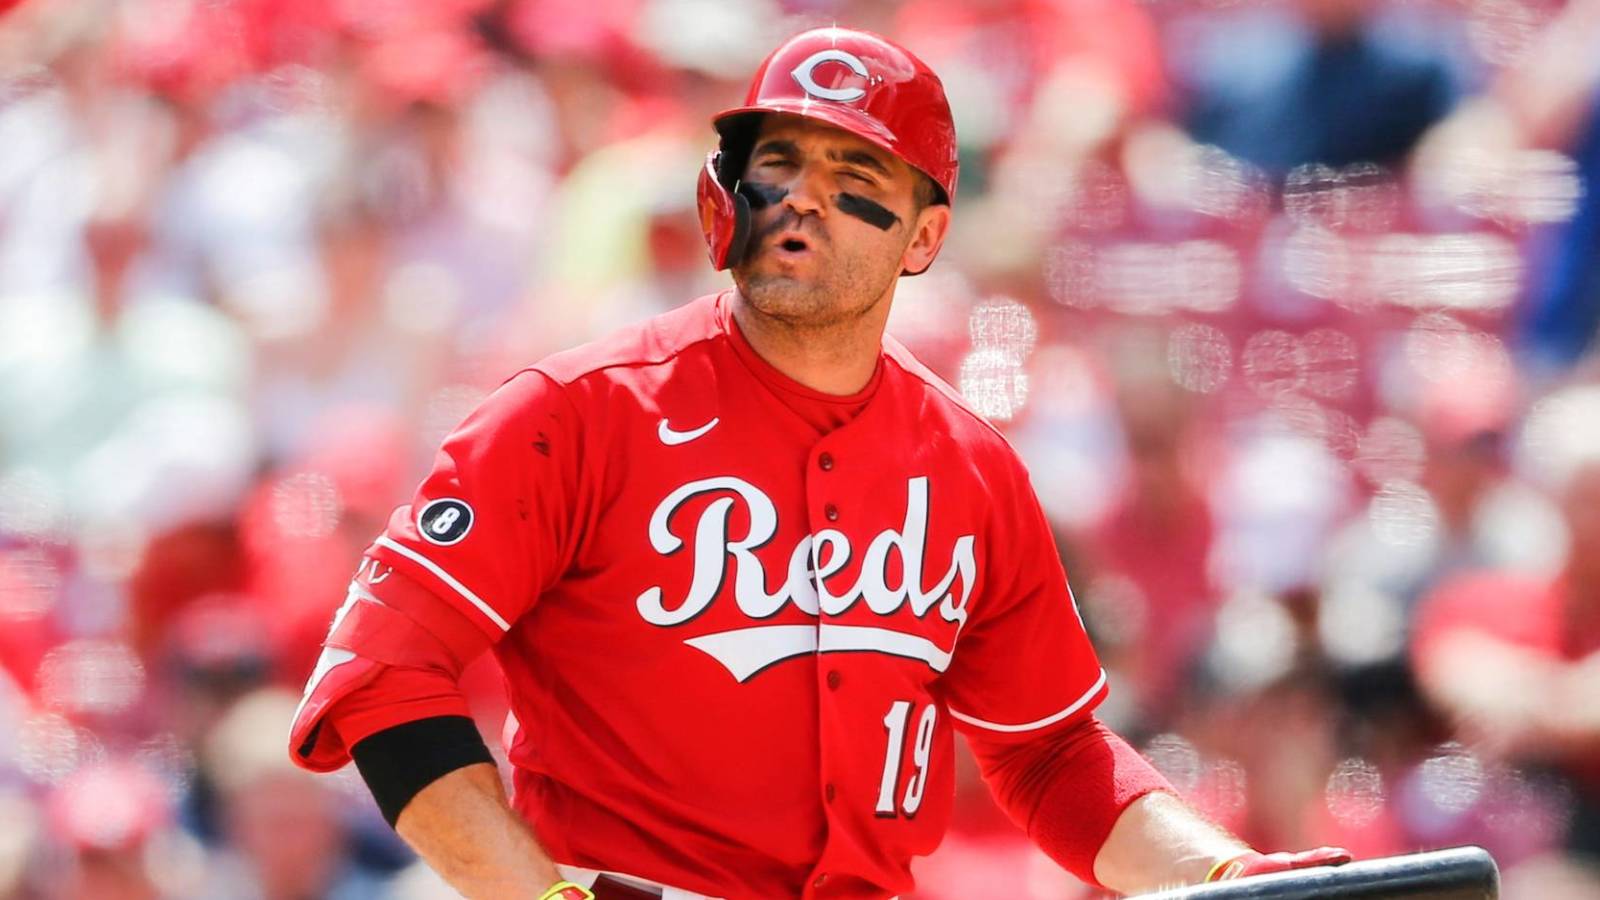 Happy birthday May Joey Votto get his 100th hit today and may he shout your name as he does it. 